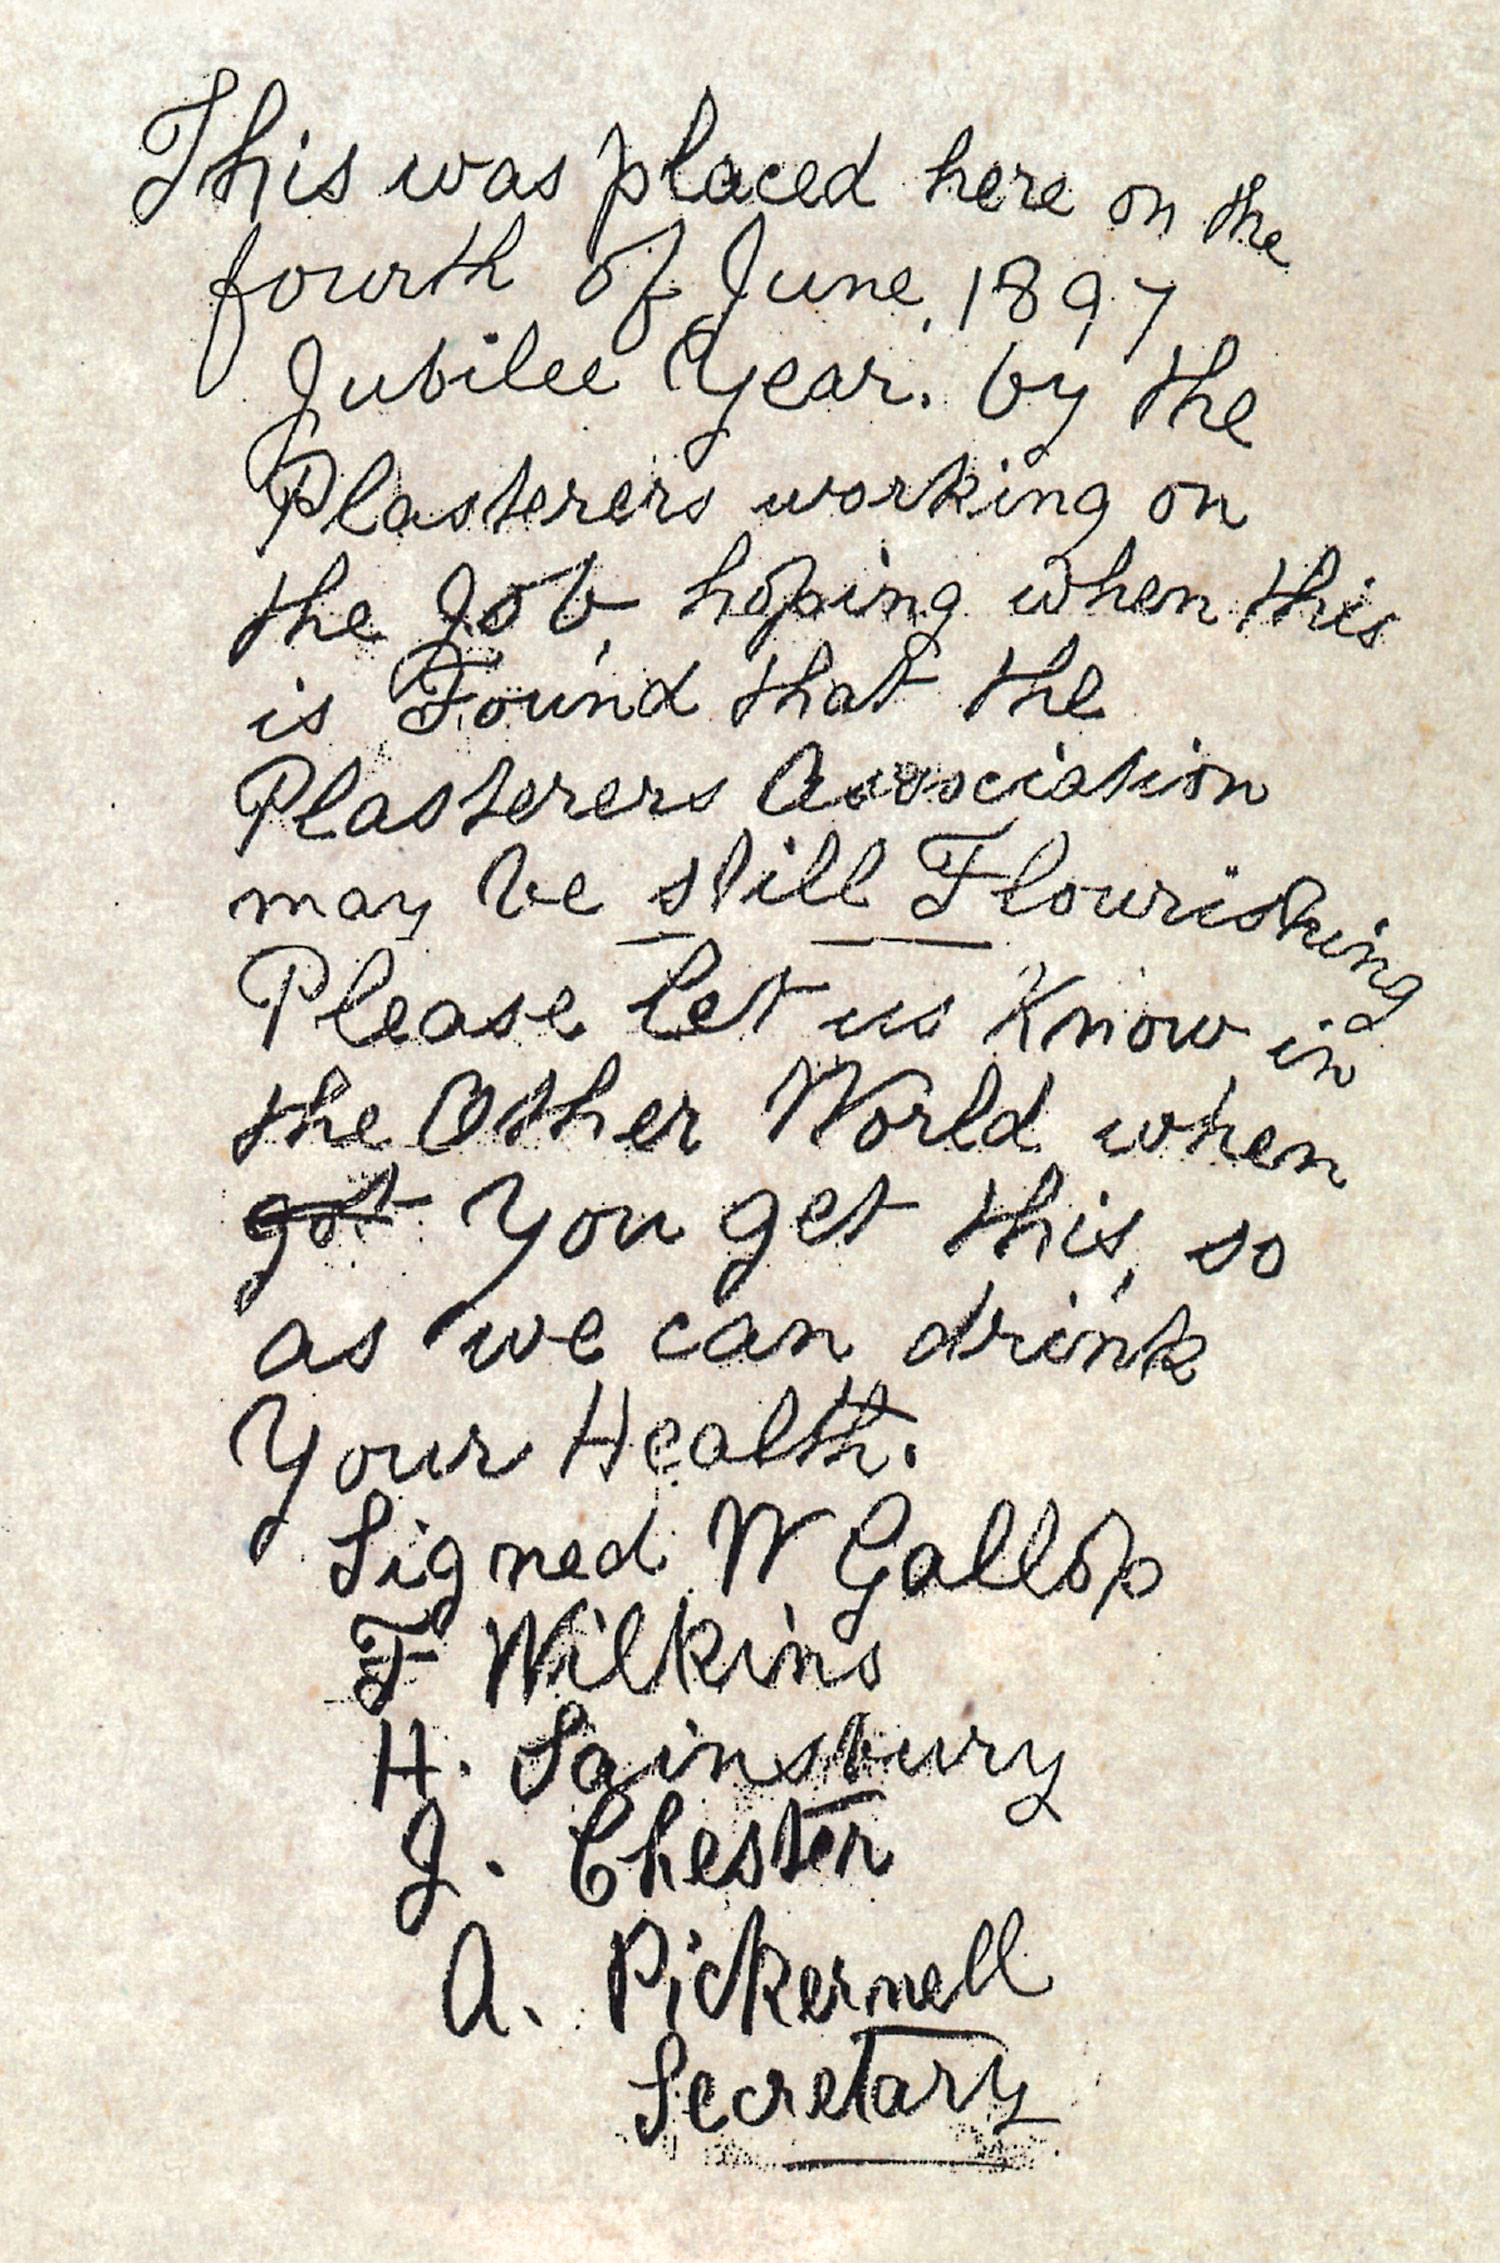 Front image of a postcard with a handwritten message to the future from 1897, found behind a wall during renovation work at Tate Gallery, London, 1985.